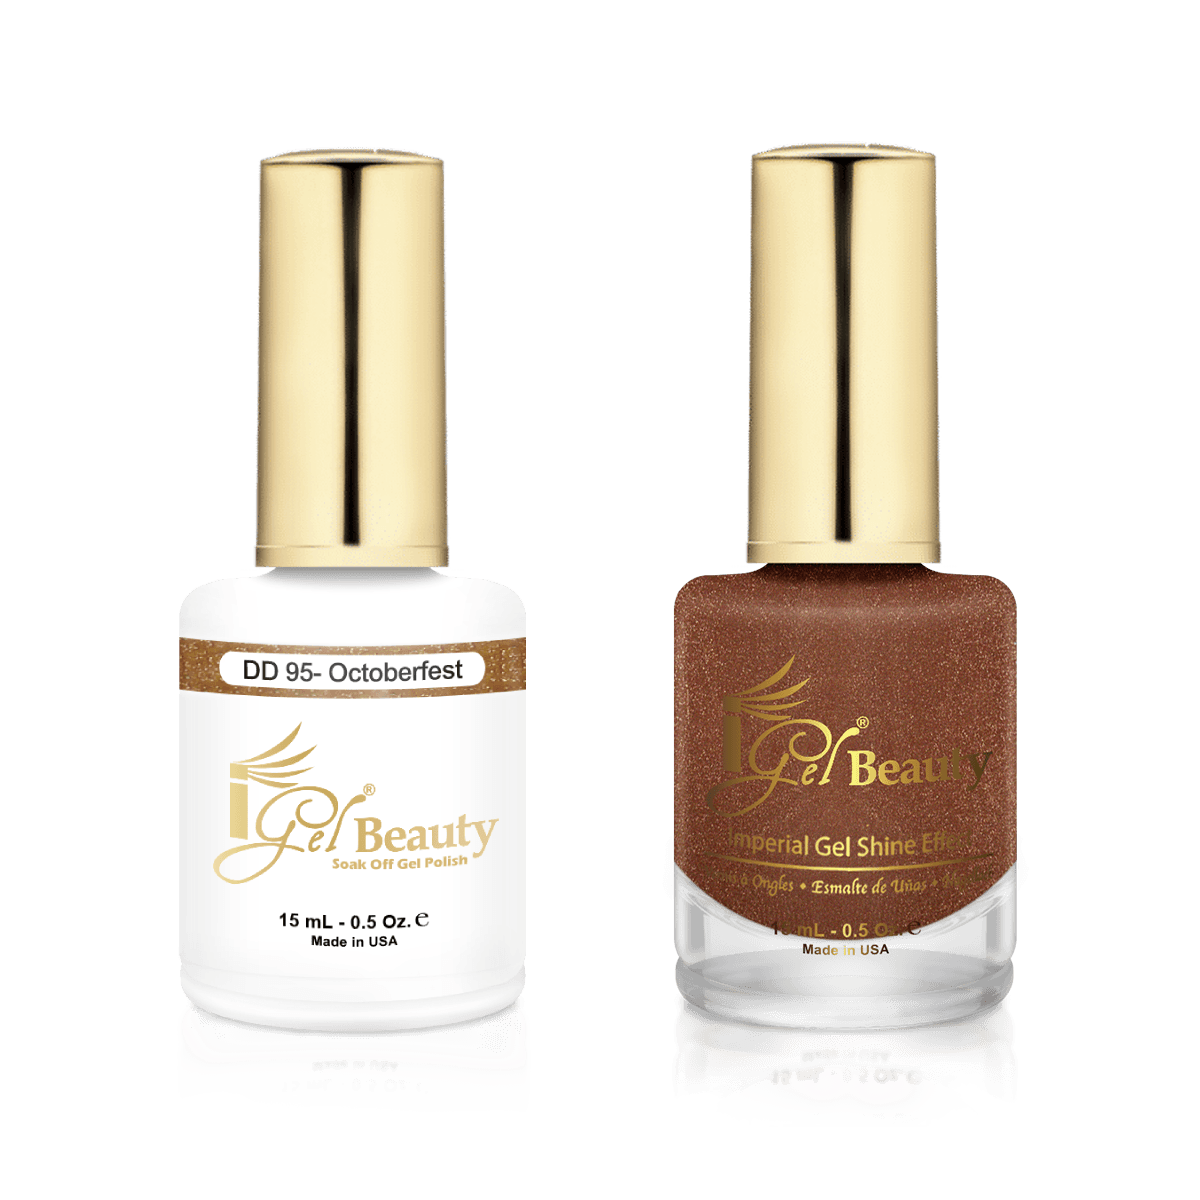 IGel Duo Gel Polish + Matching Nail Lacquer DD 95 OCTOBERFEST